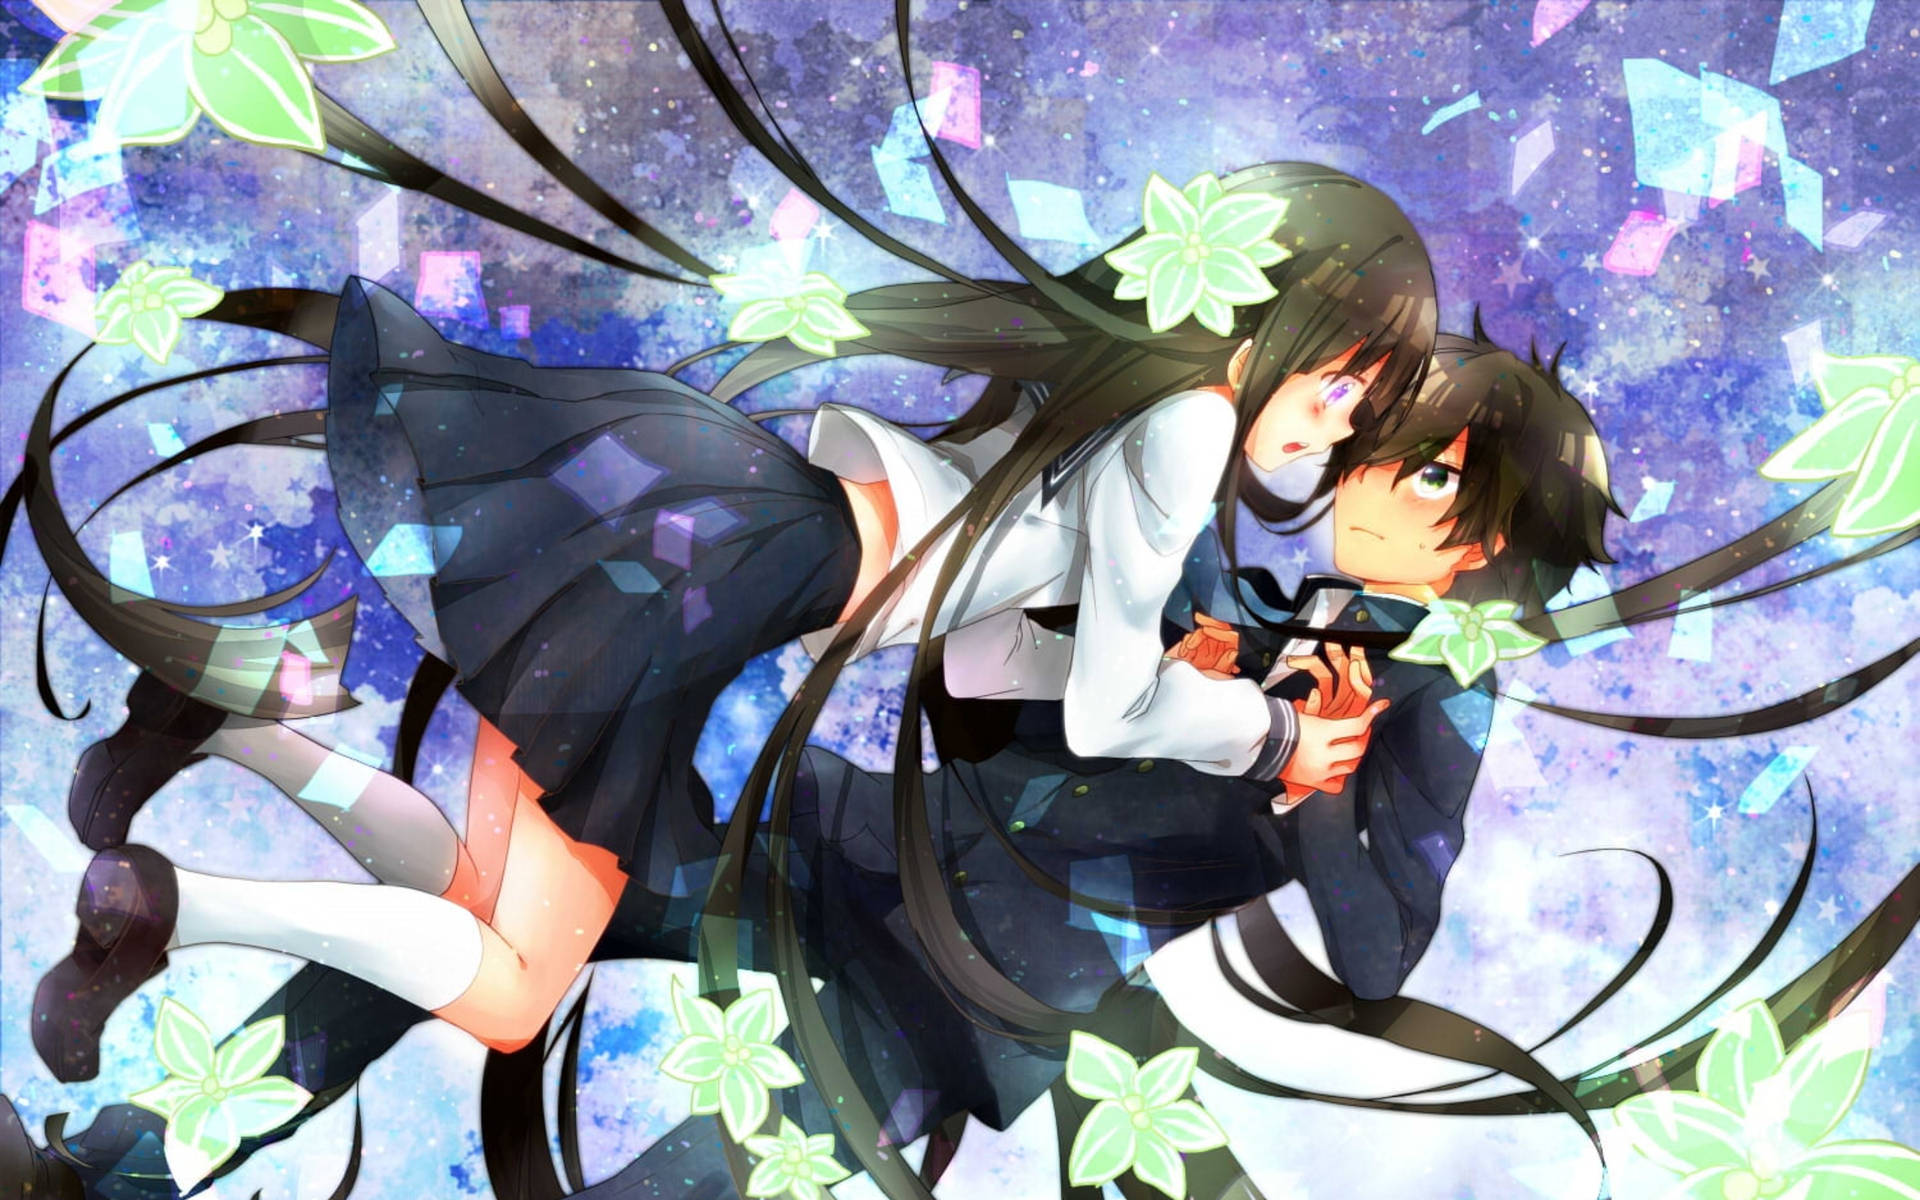 Cute Anime Couple With Green Flowers Background